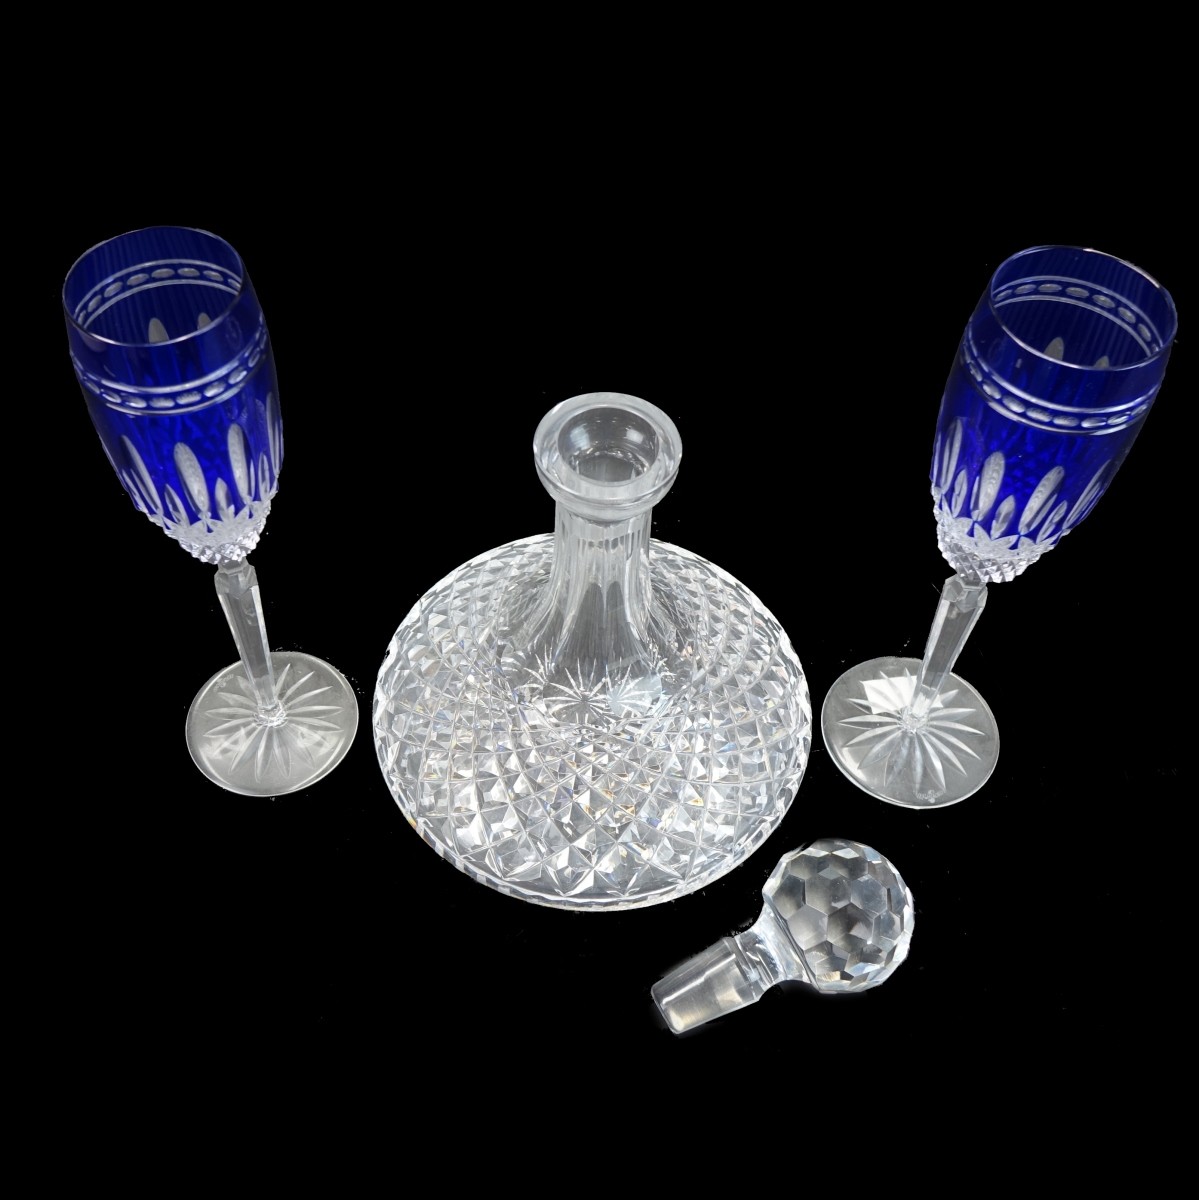 3 pcs Waterford Decanter with Champagne Glasses